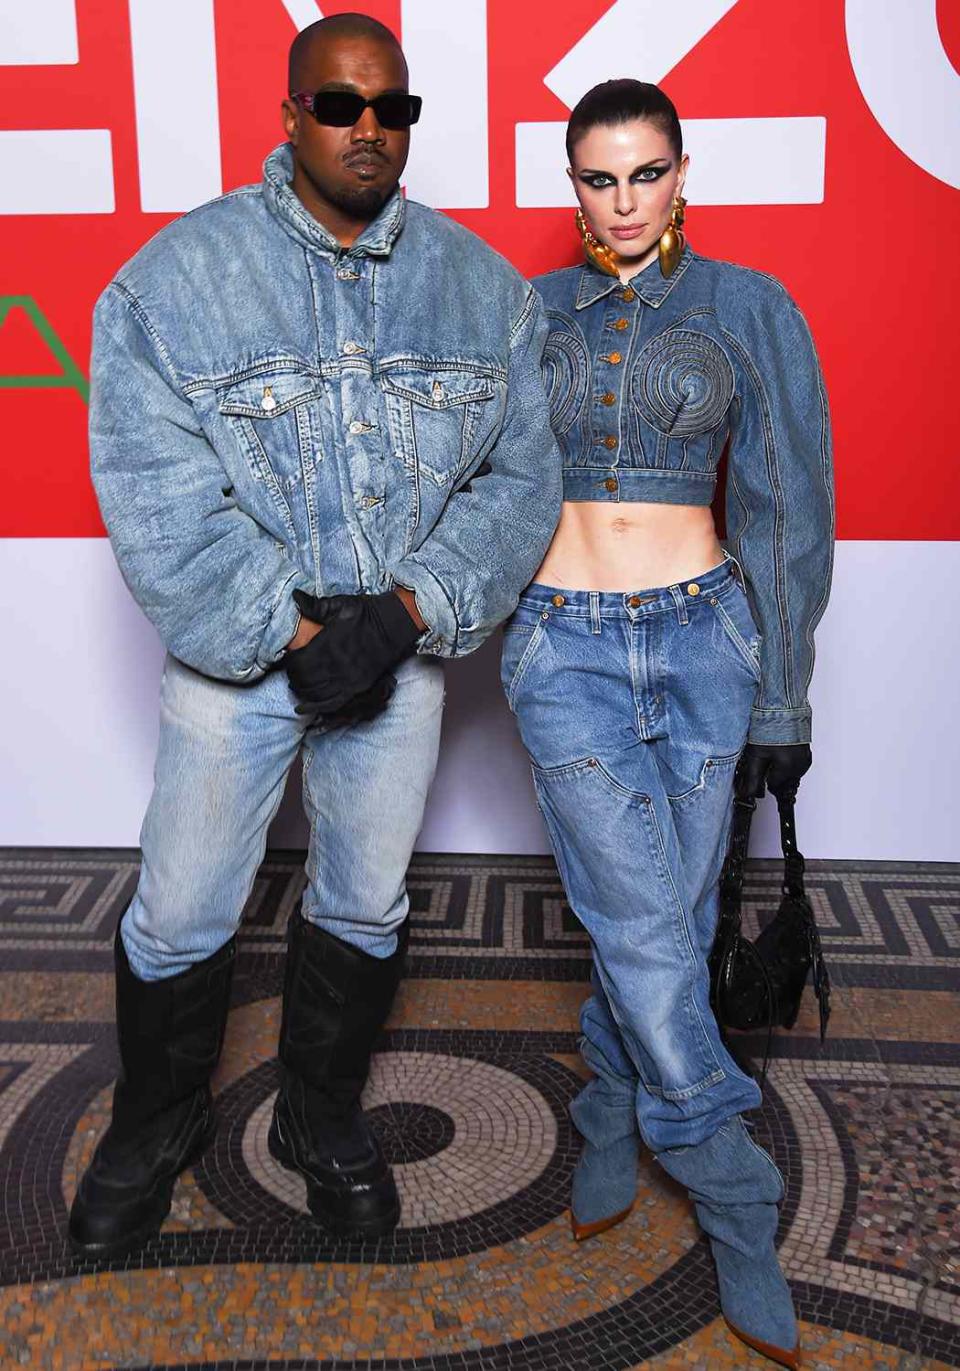 Kanye West and Julia Fox attend the Kenzo Fall/Winter 2022/2023 show as part of Paris Fashion Week on January 23, 2022 in Paris, France.